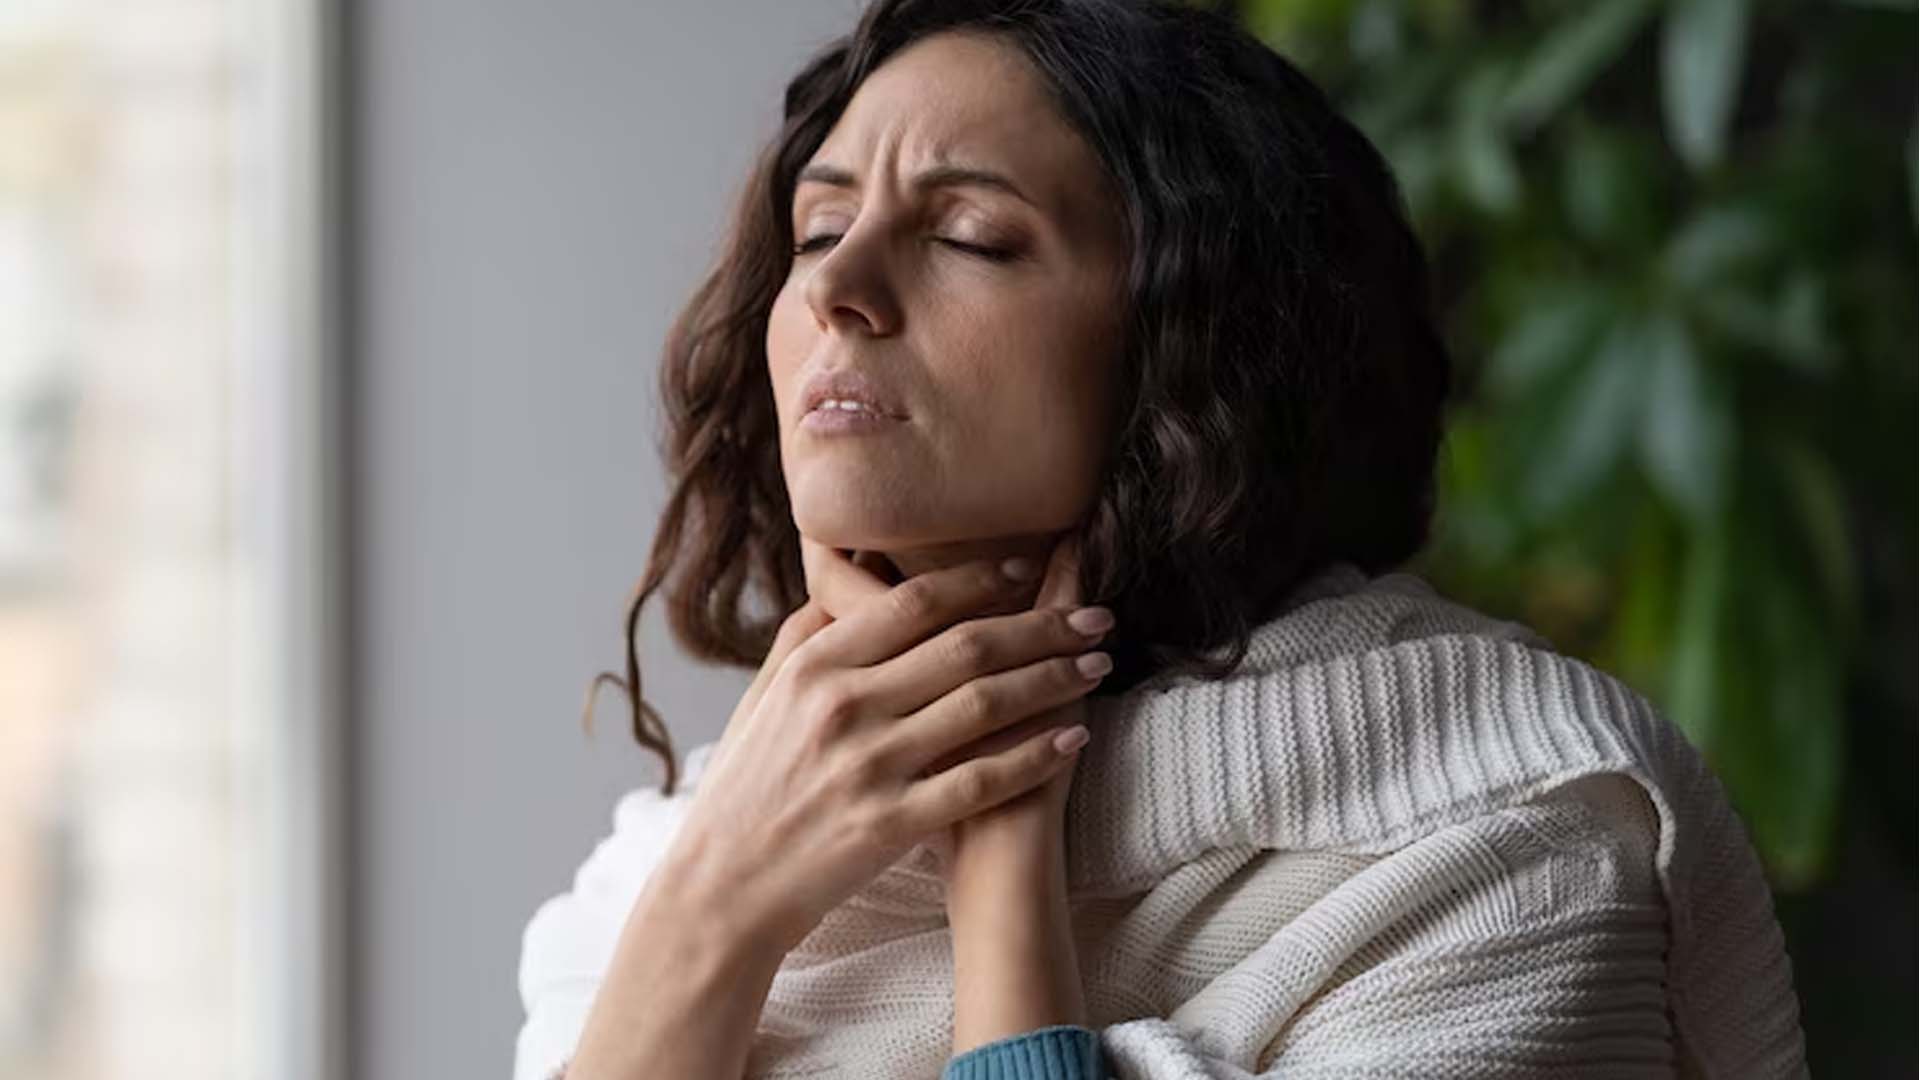 Can Sore Throat Cause Fever?